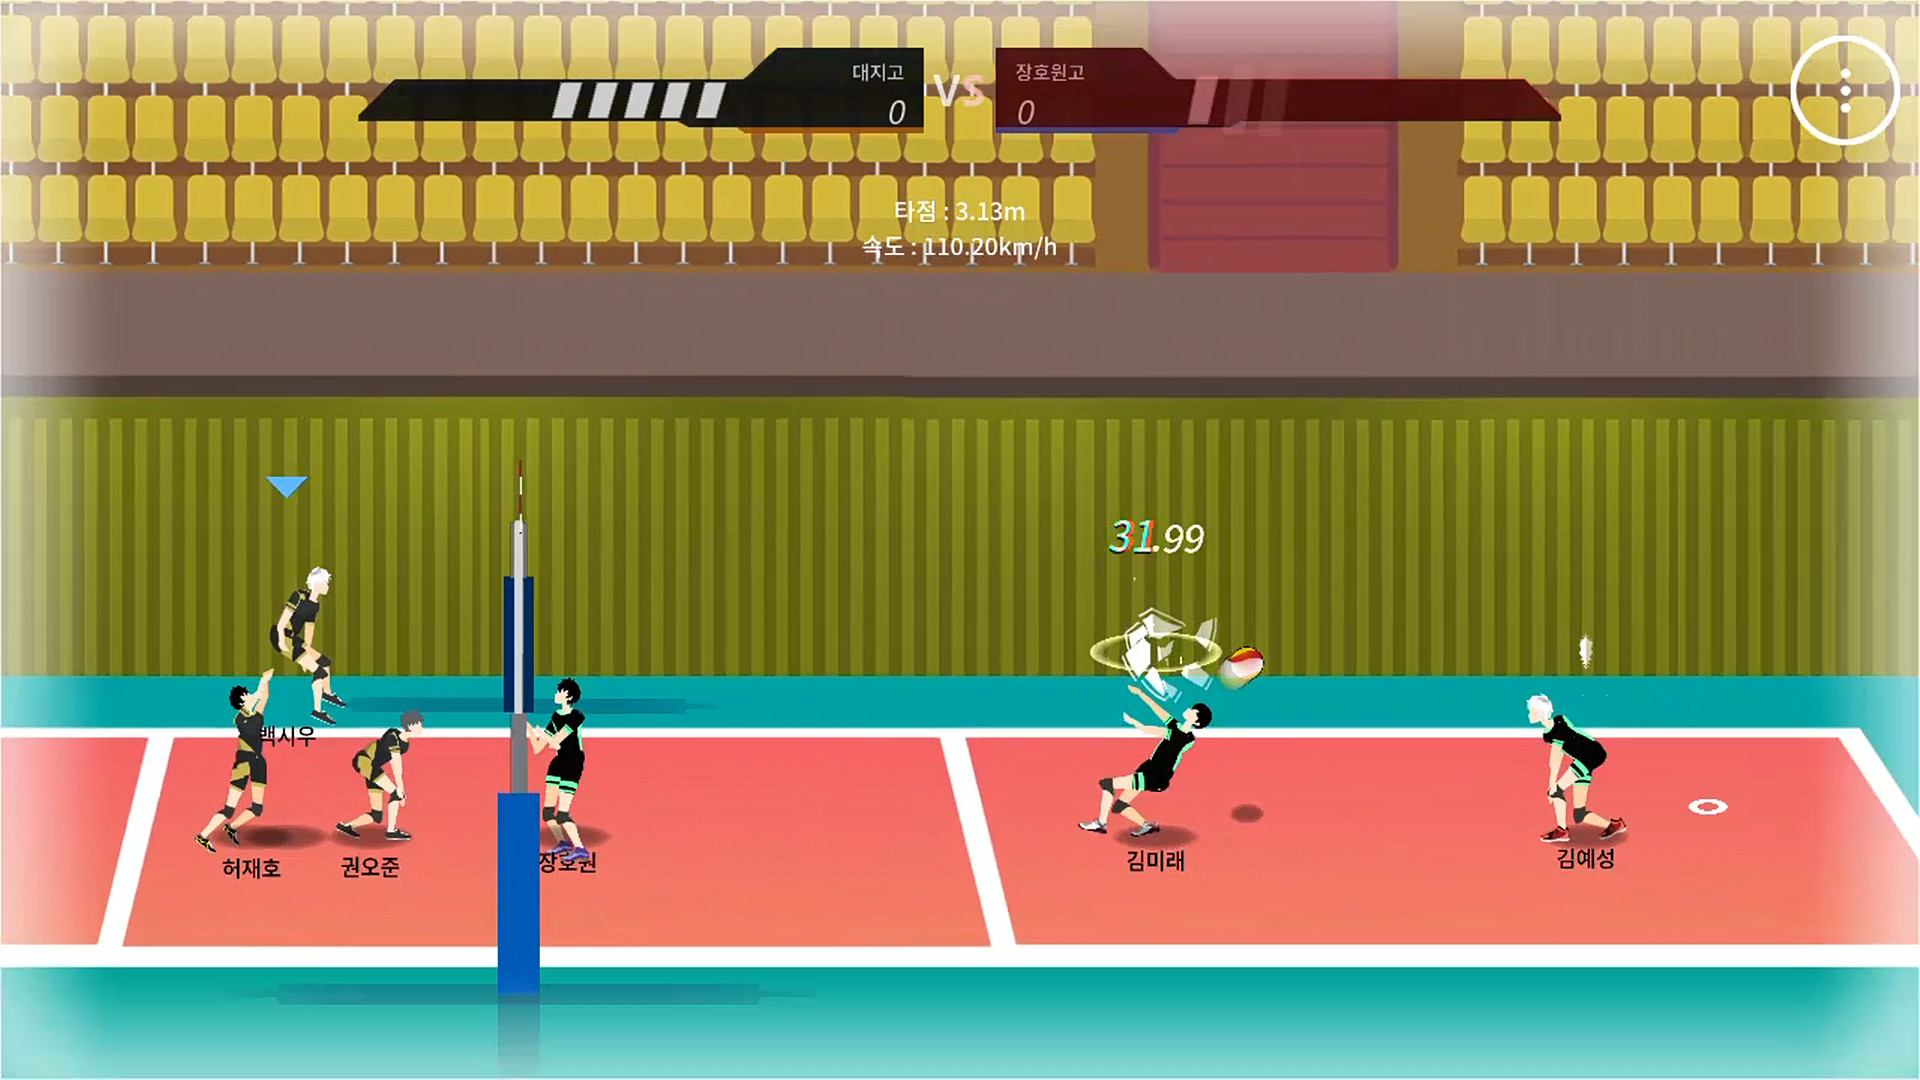 The spike volleyball story мод. Игра the Spike Volleyball story. Игра волейбол на ПК. Волейбол игра на ПК the Spike. Спайк волейбол на ПК.